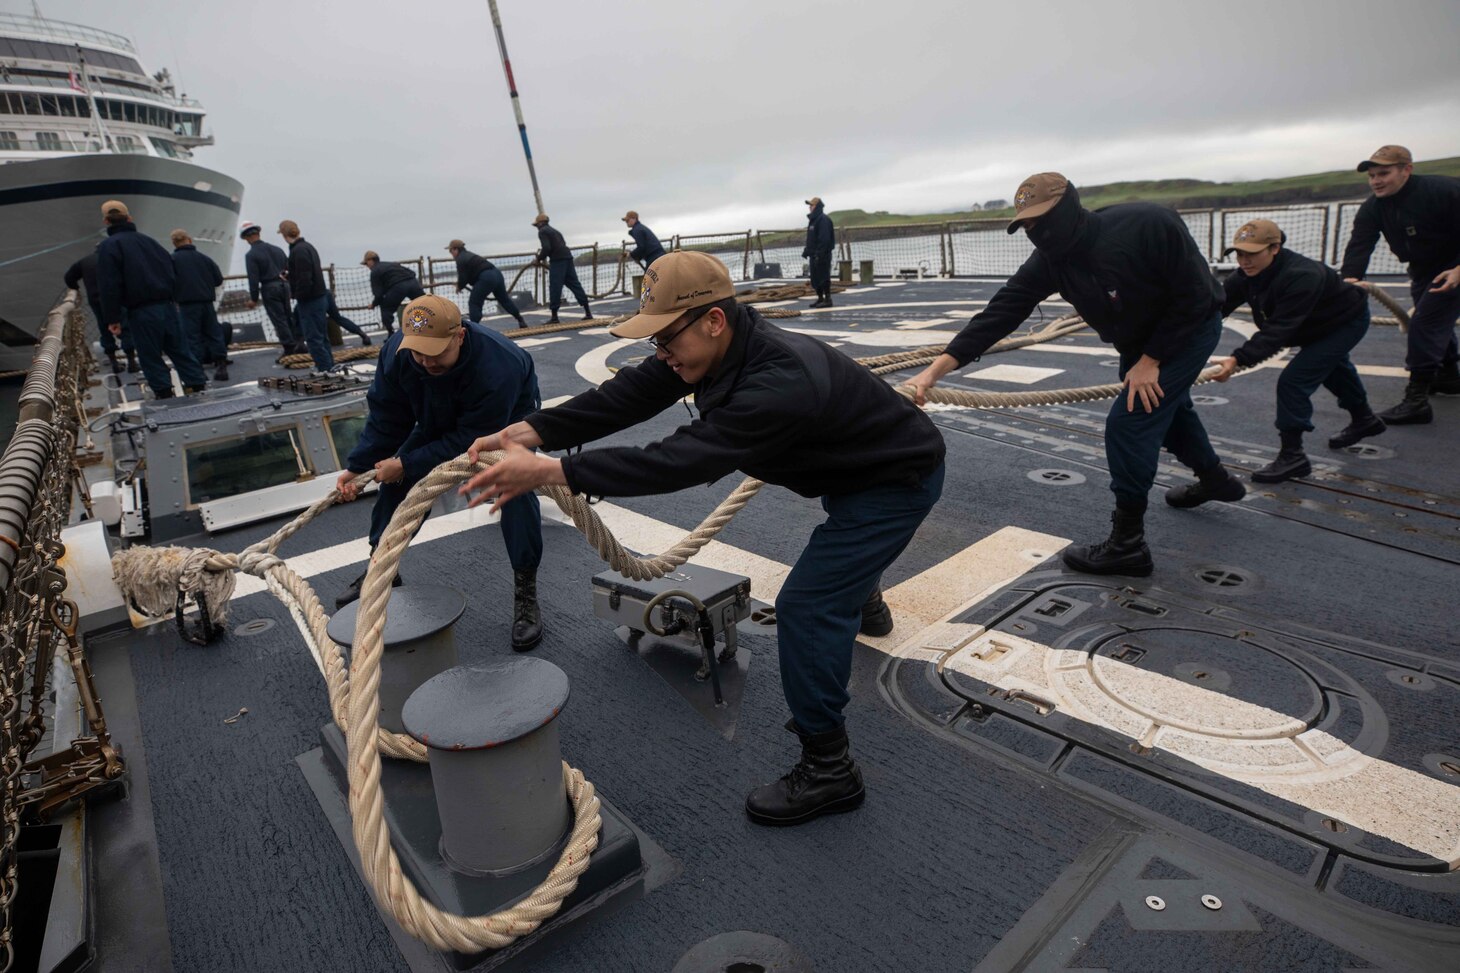 (July 18, 2021) Sailors aboard the Arleigh Burke-class guided-missile destroyer USS Roosevelt (DDG 80) handle line during a sea and anchor evolution, July 18, 2021. Roosevelt, forward-deployed to Rota, Spain, is on its second patrol in the U.S. Sixth Fleet area of operations in support of regional allies and partners and U.S. national security interests in Europe and Africa.